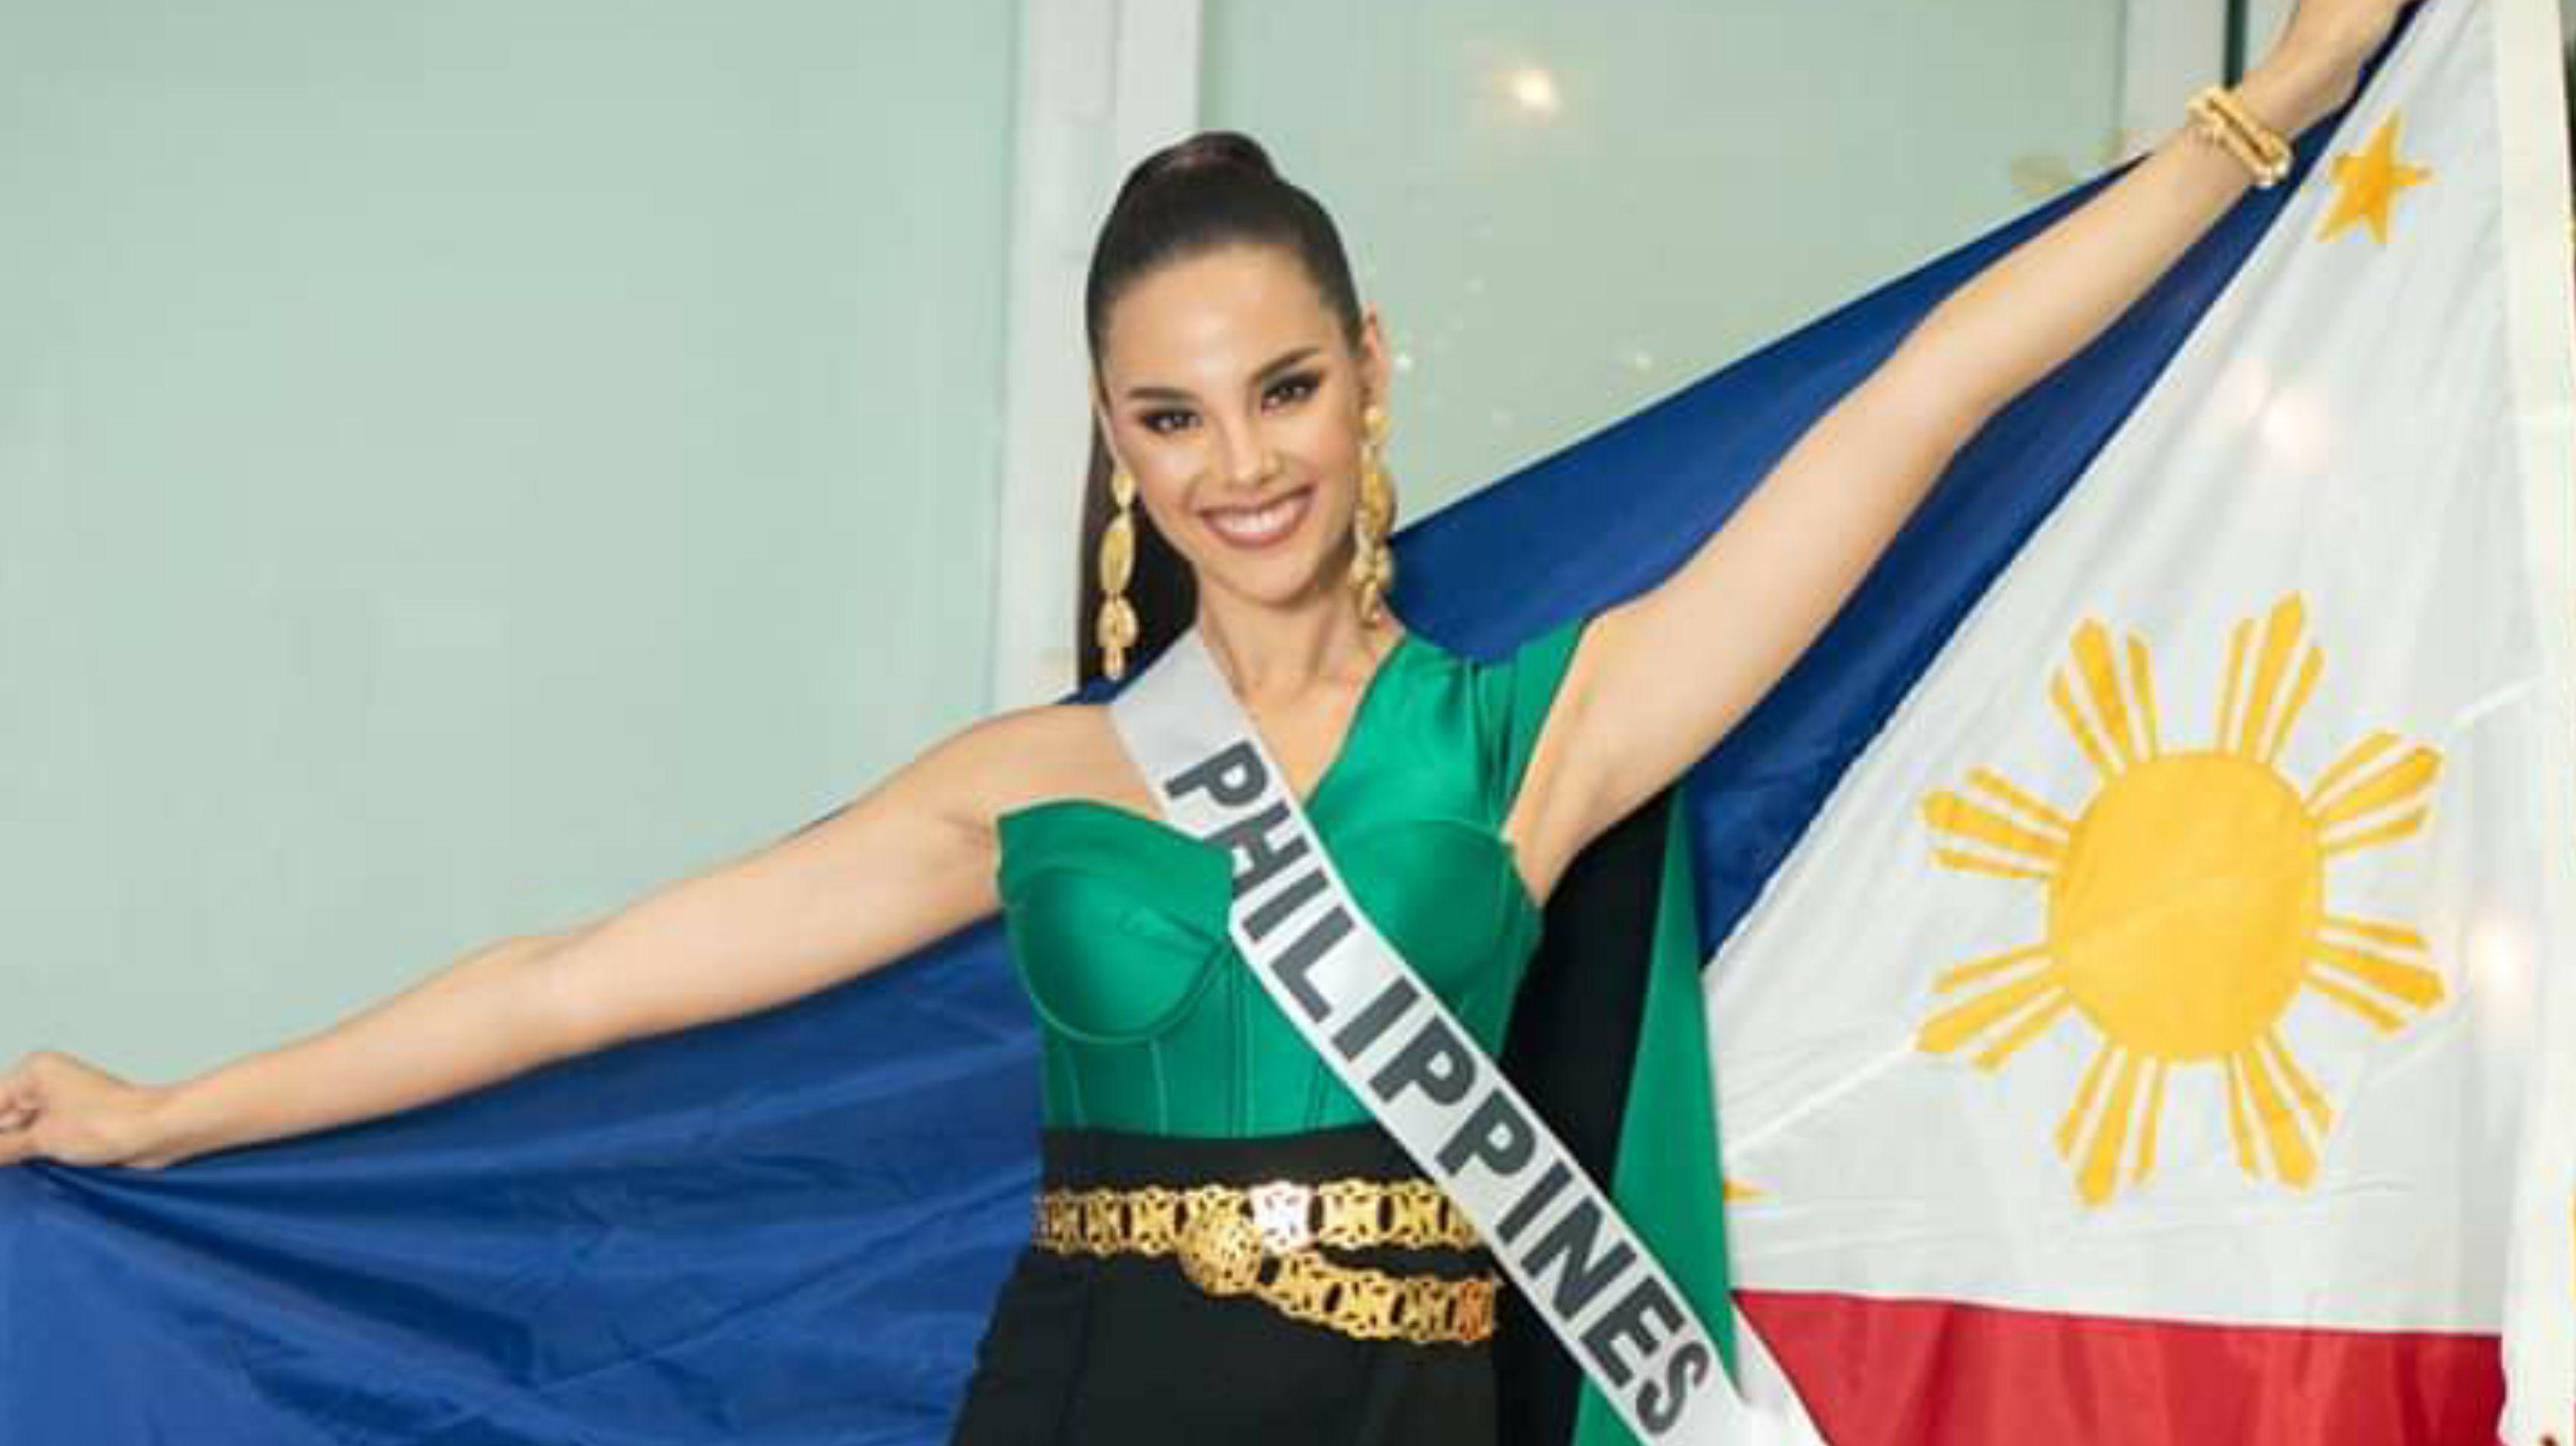 IN PHOTOS: Miss Philippines Catriona Gray Is Now Bangkok Bound